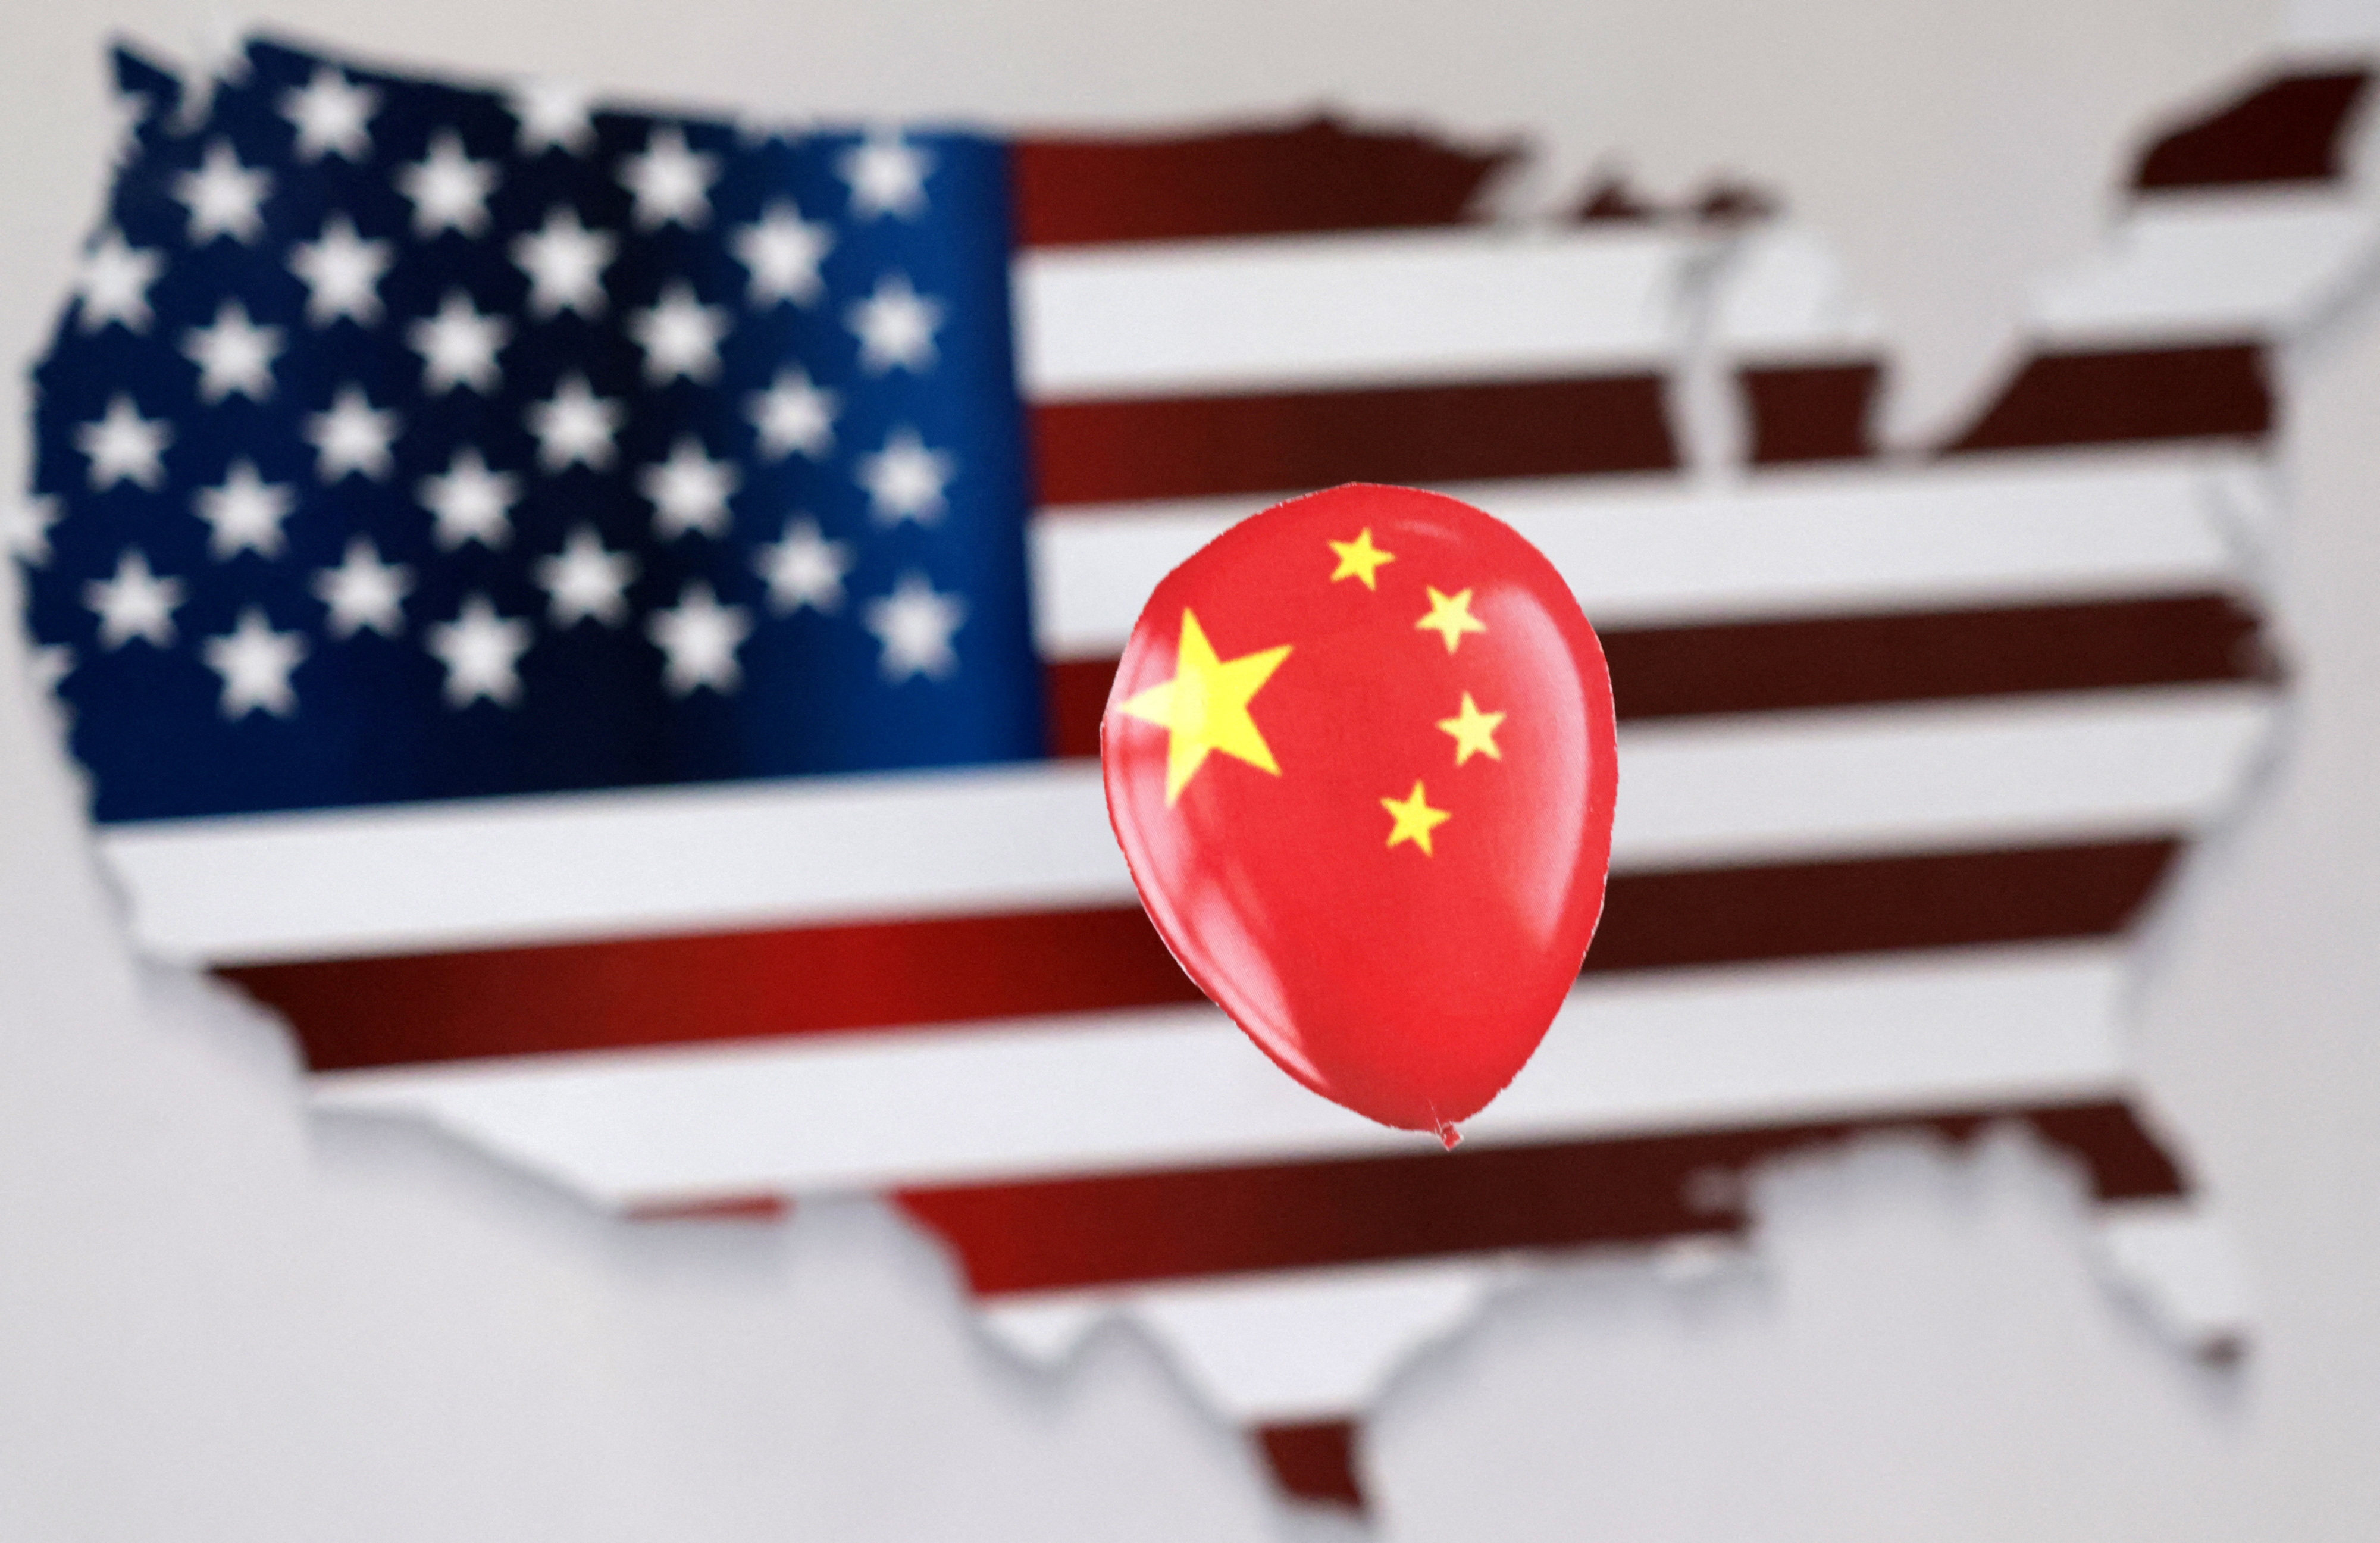 To Beijing, the shooting down of the balloon was an adversarial move, so any further cooperation was blocked: China requires a certain atmosphere before it can build trust. Photo illustration: Reuters